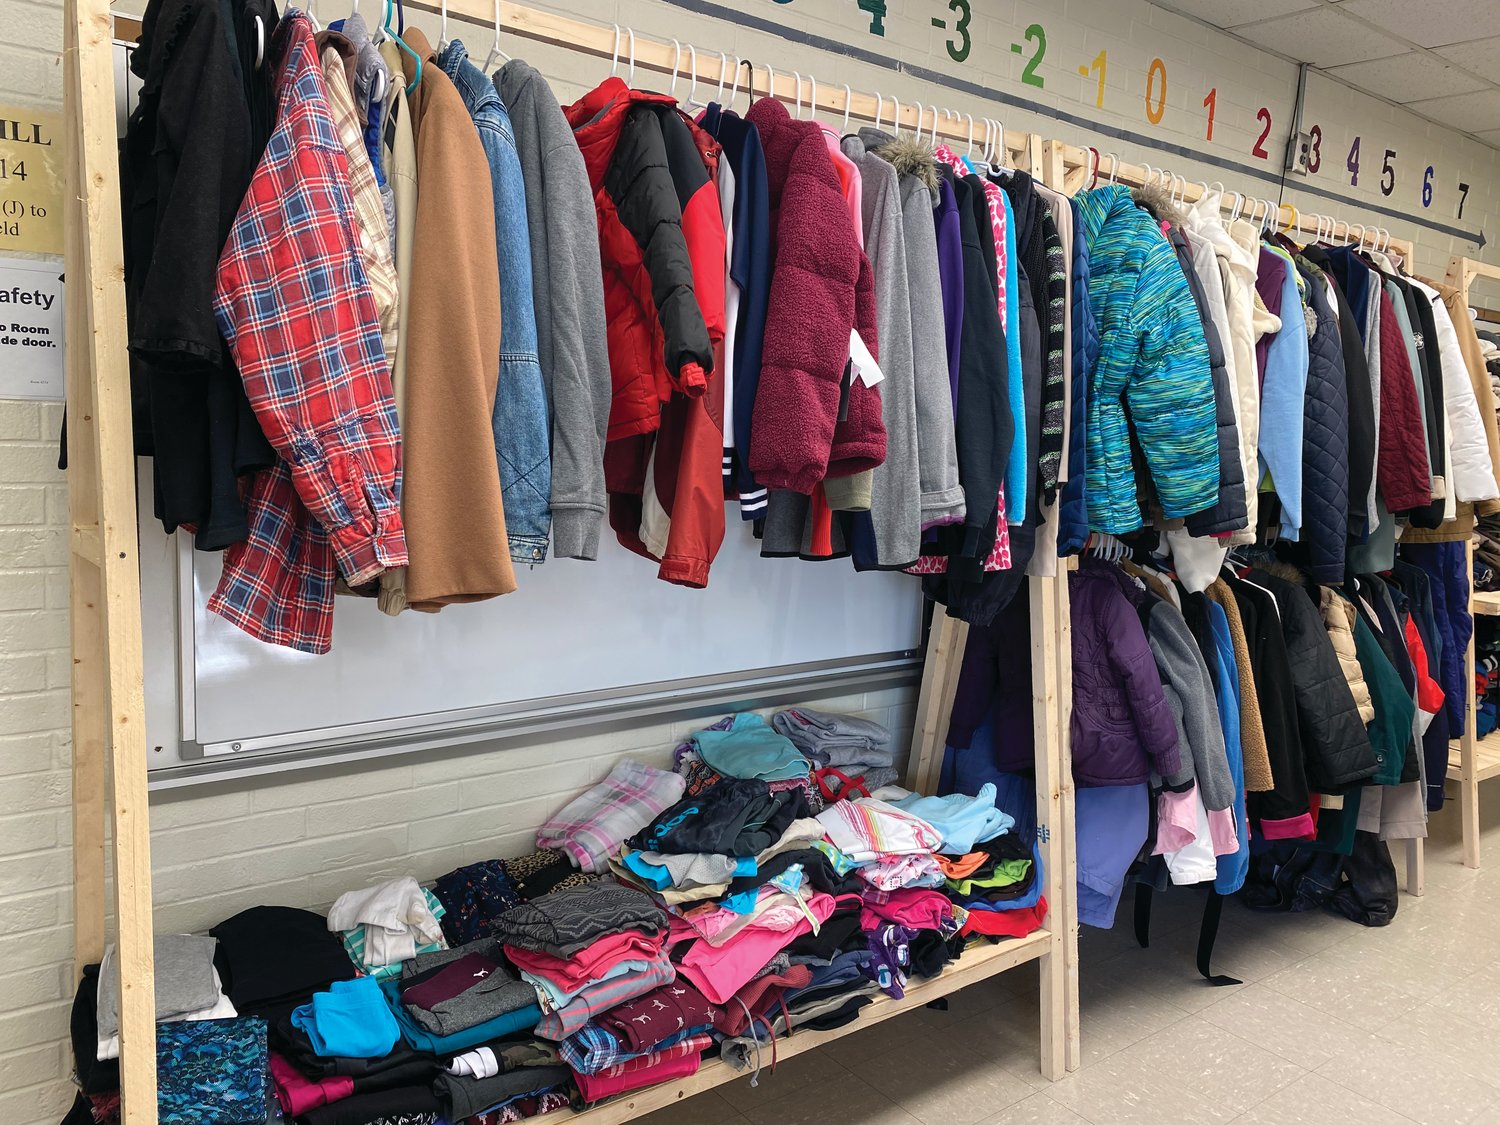 The Mustang Mall already has a number of winter clothing items on hand for students in need.